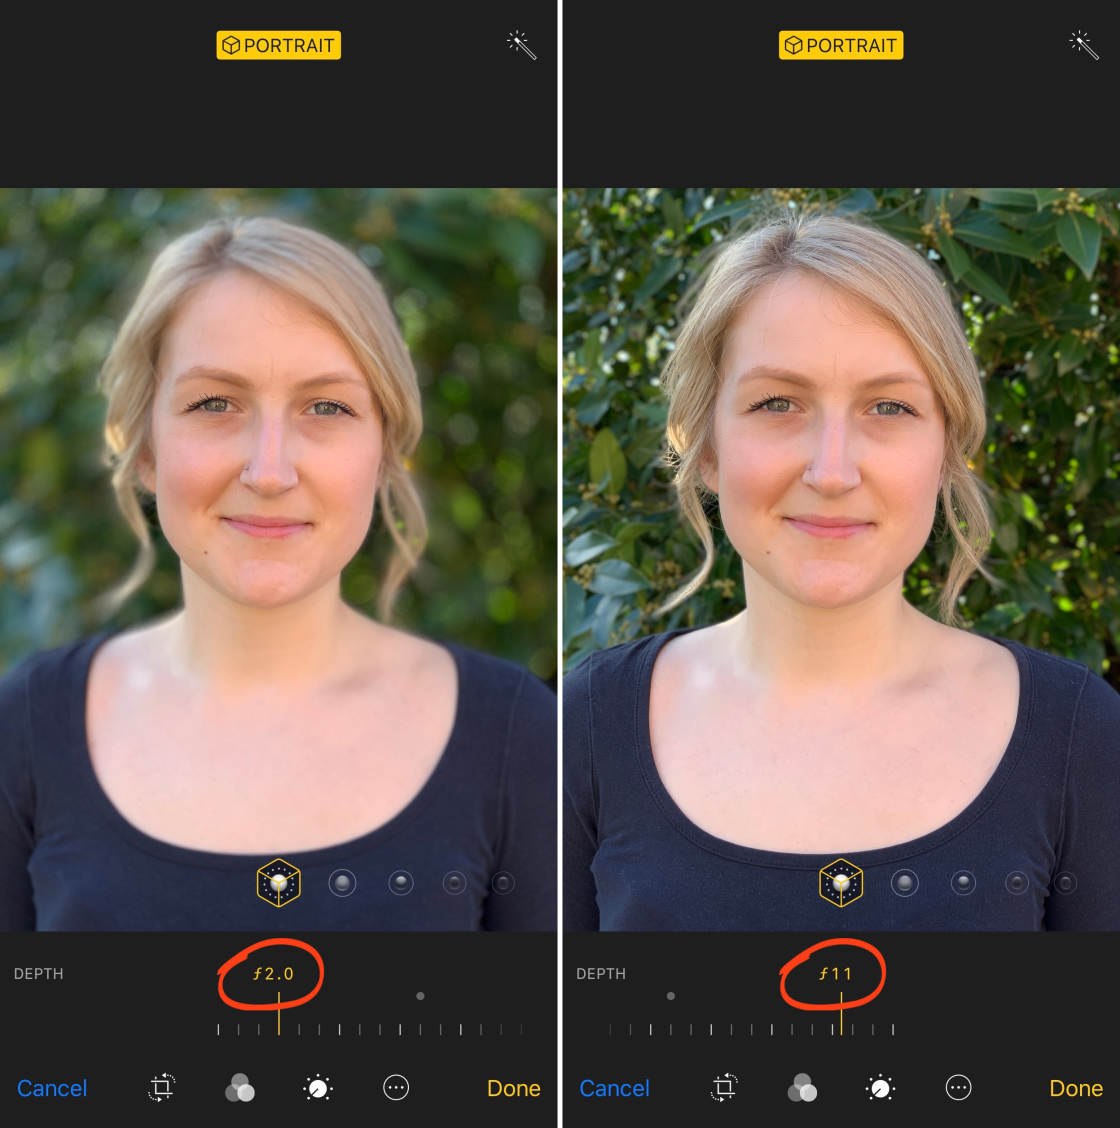 Discover The Best Blur Background App For Blurring Your iPhone Photos